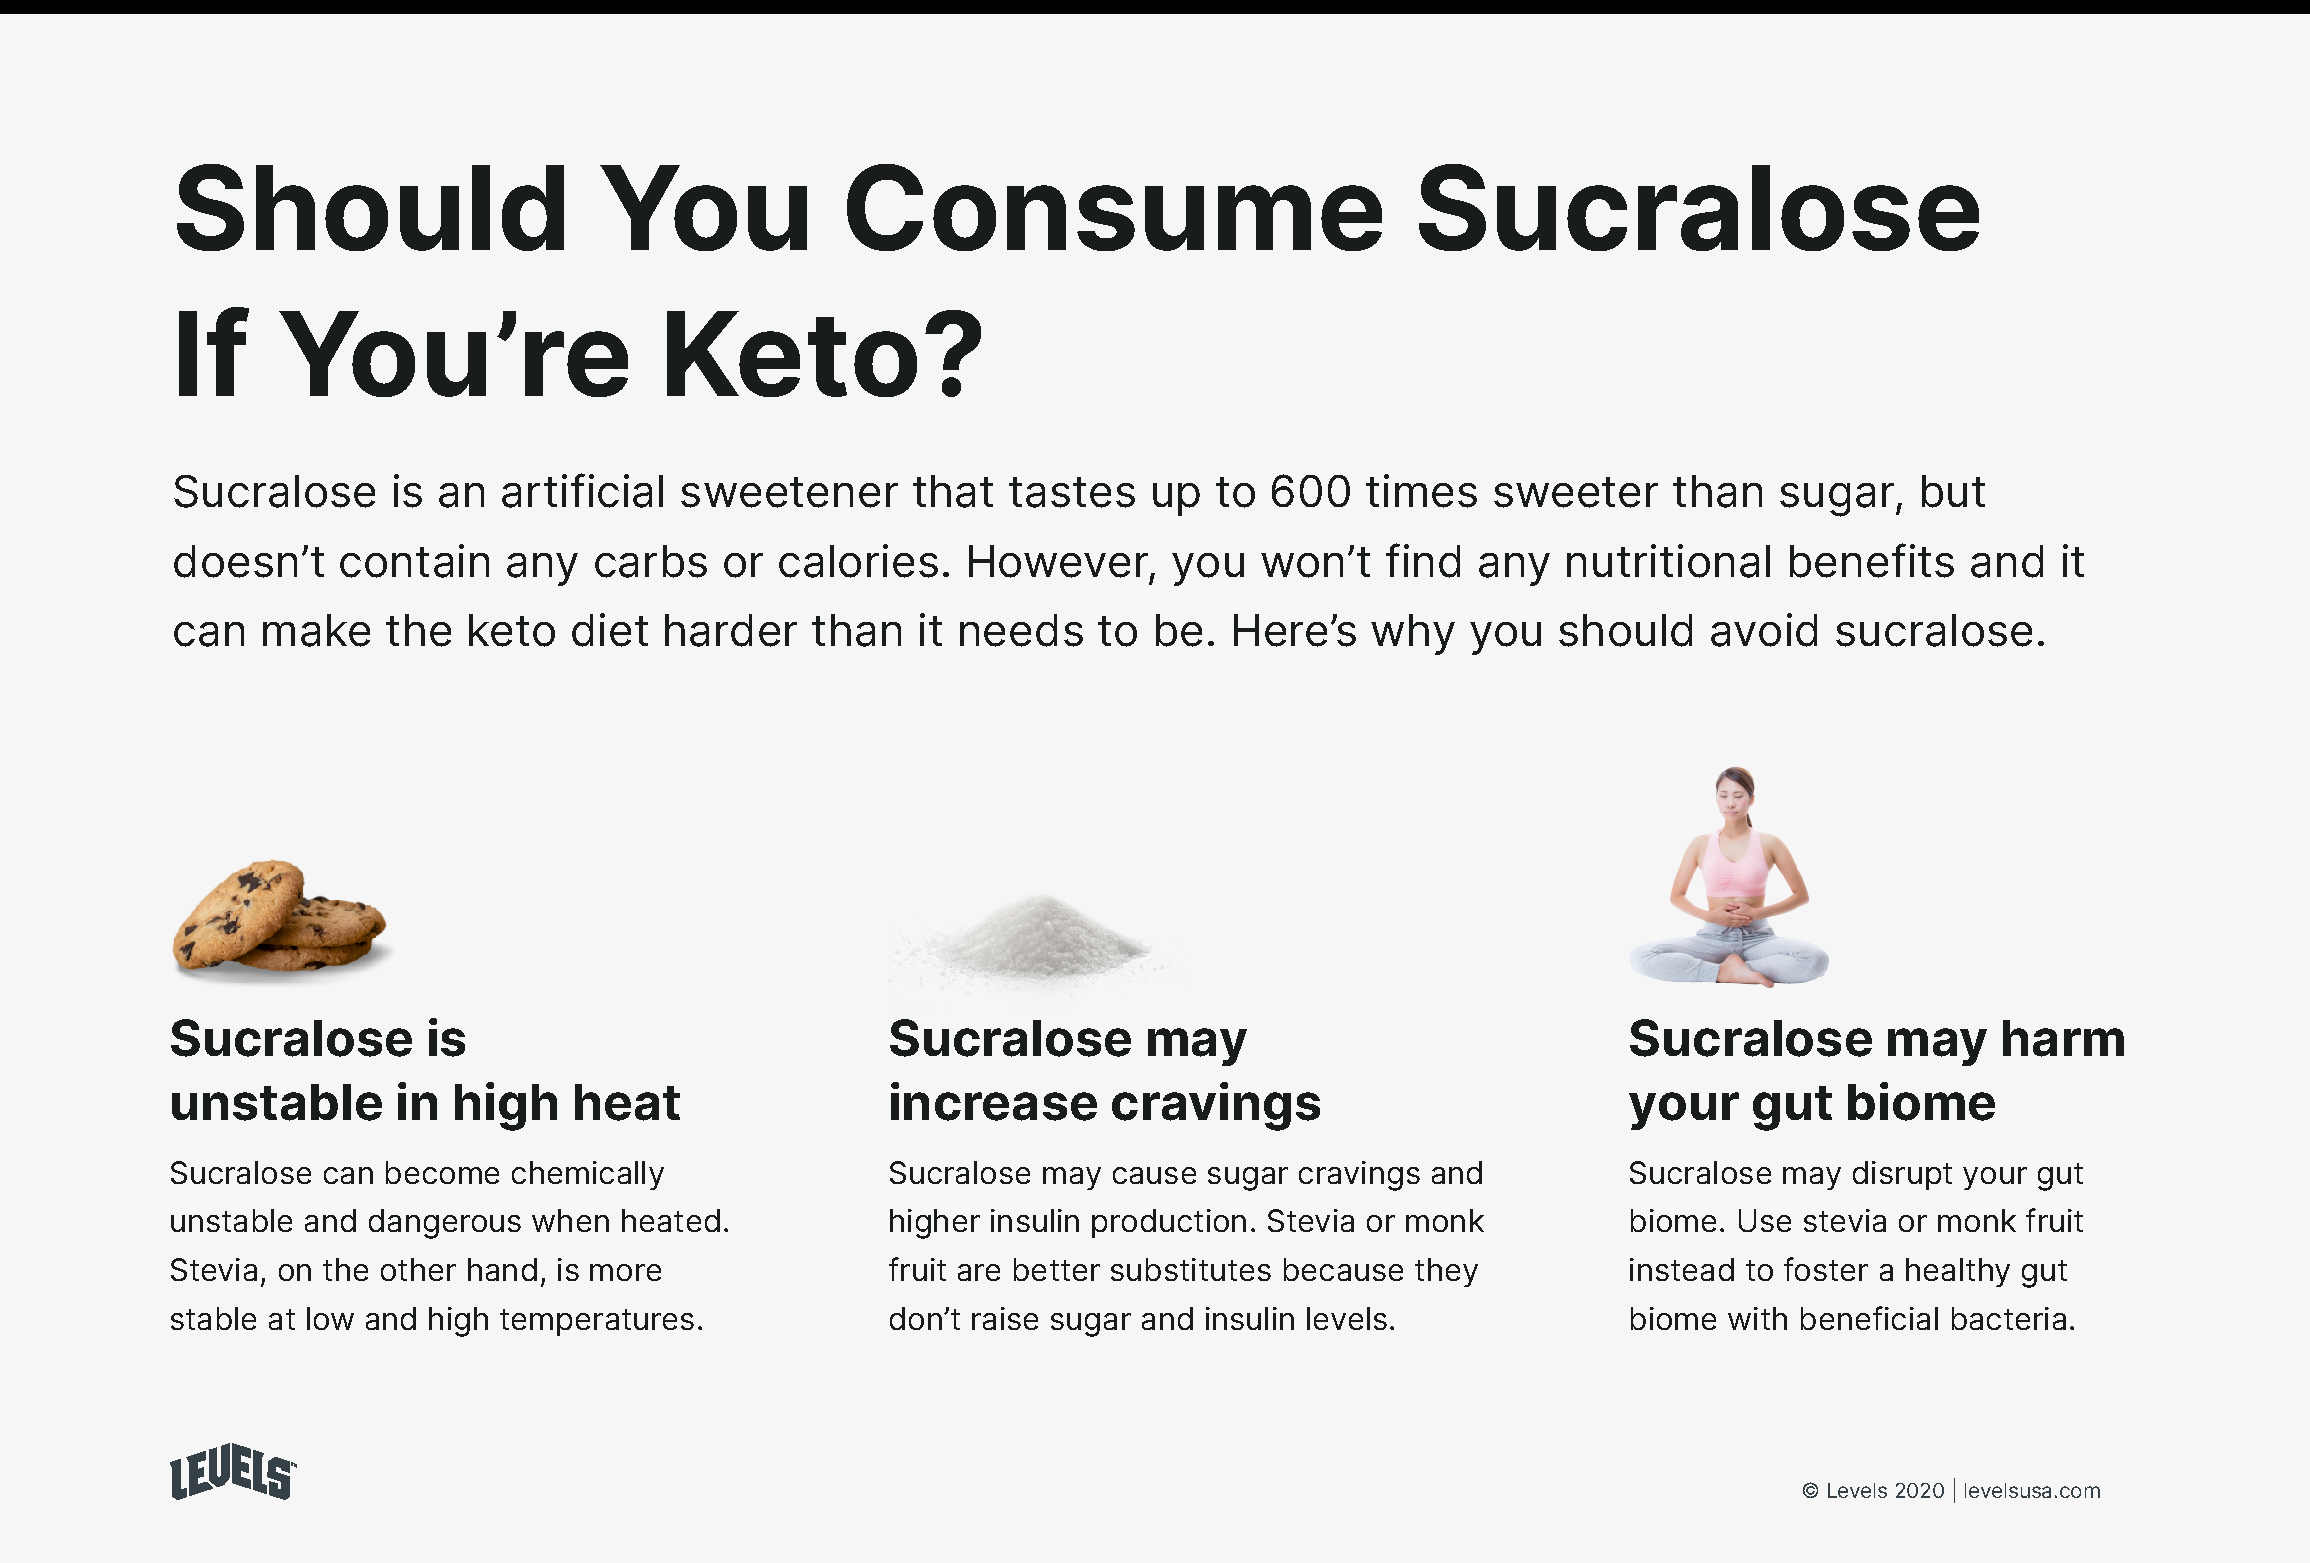 Is Sucralose Keto Friendly? - Infographic